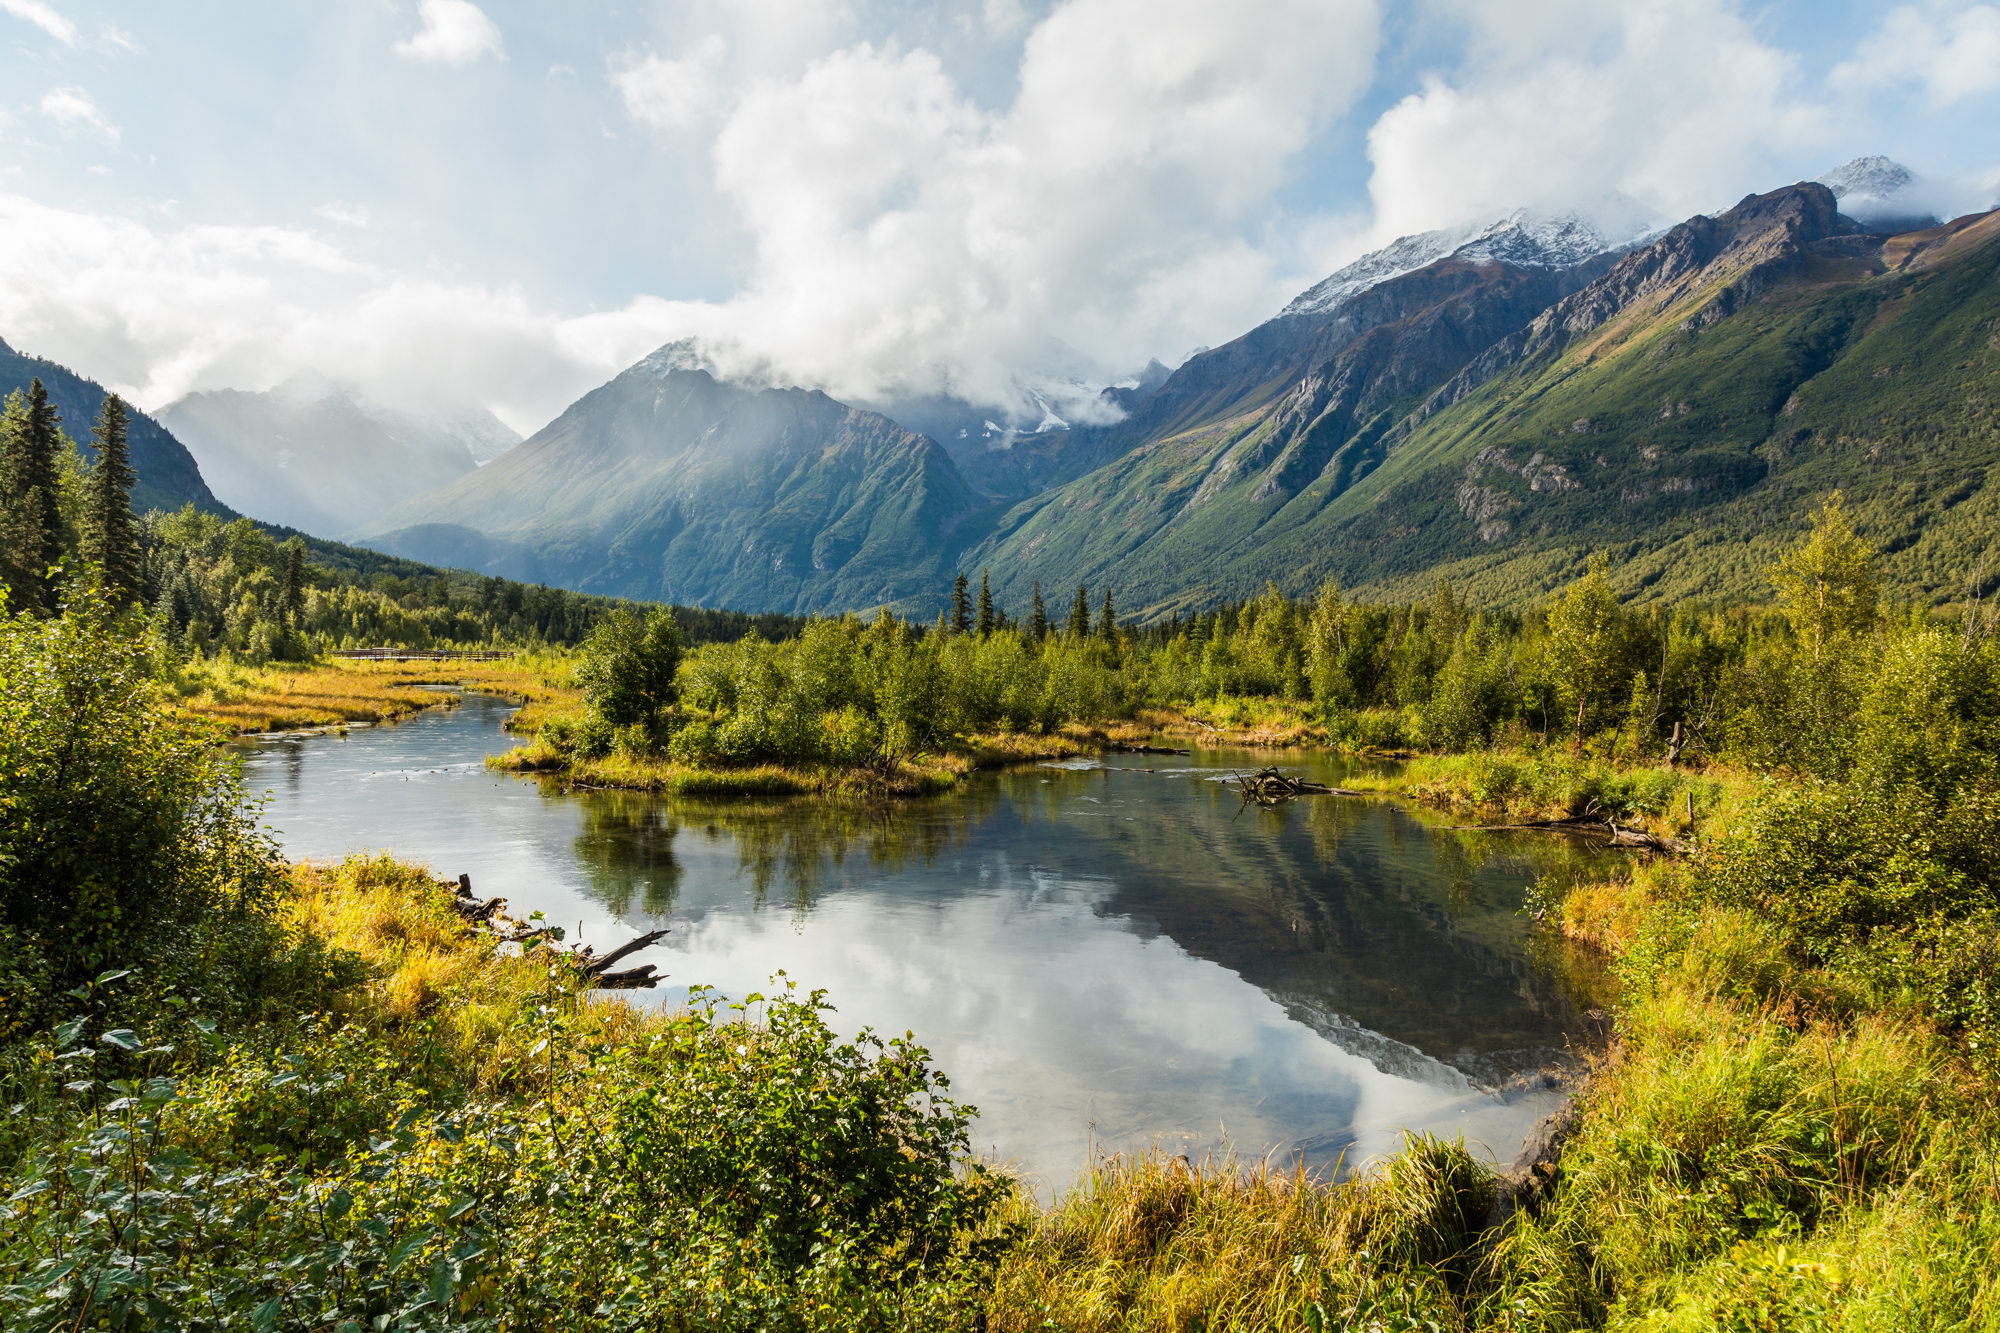 View of a lake in the Eagle River Valley, Municipality of Anchorage, Alaska, United States.